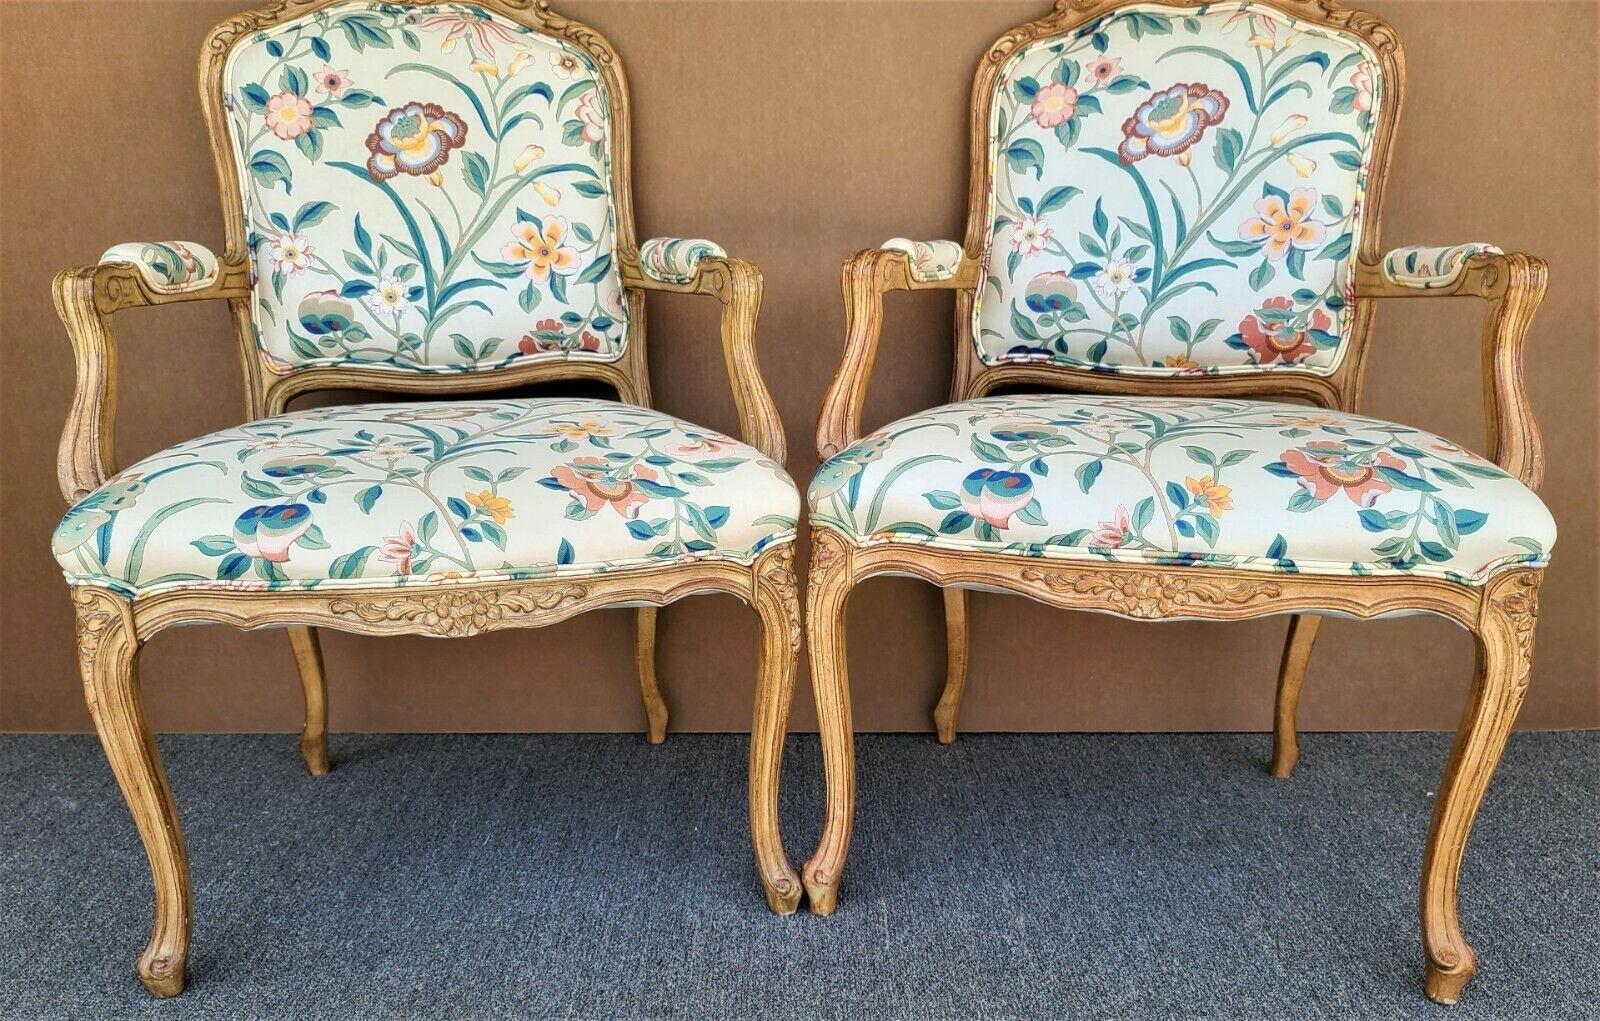 French Provincial Louis XV Armchairs by Chateau d'Ax, Set of 2 In Good Condition For Sale In Lake Worth, FL